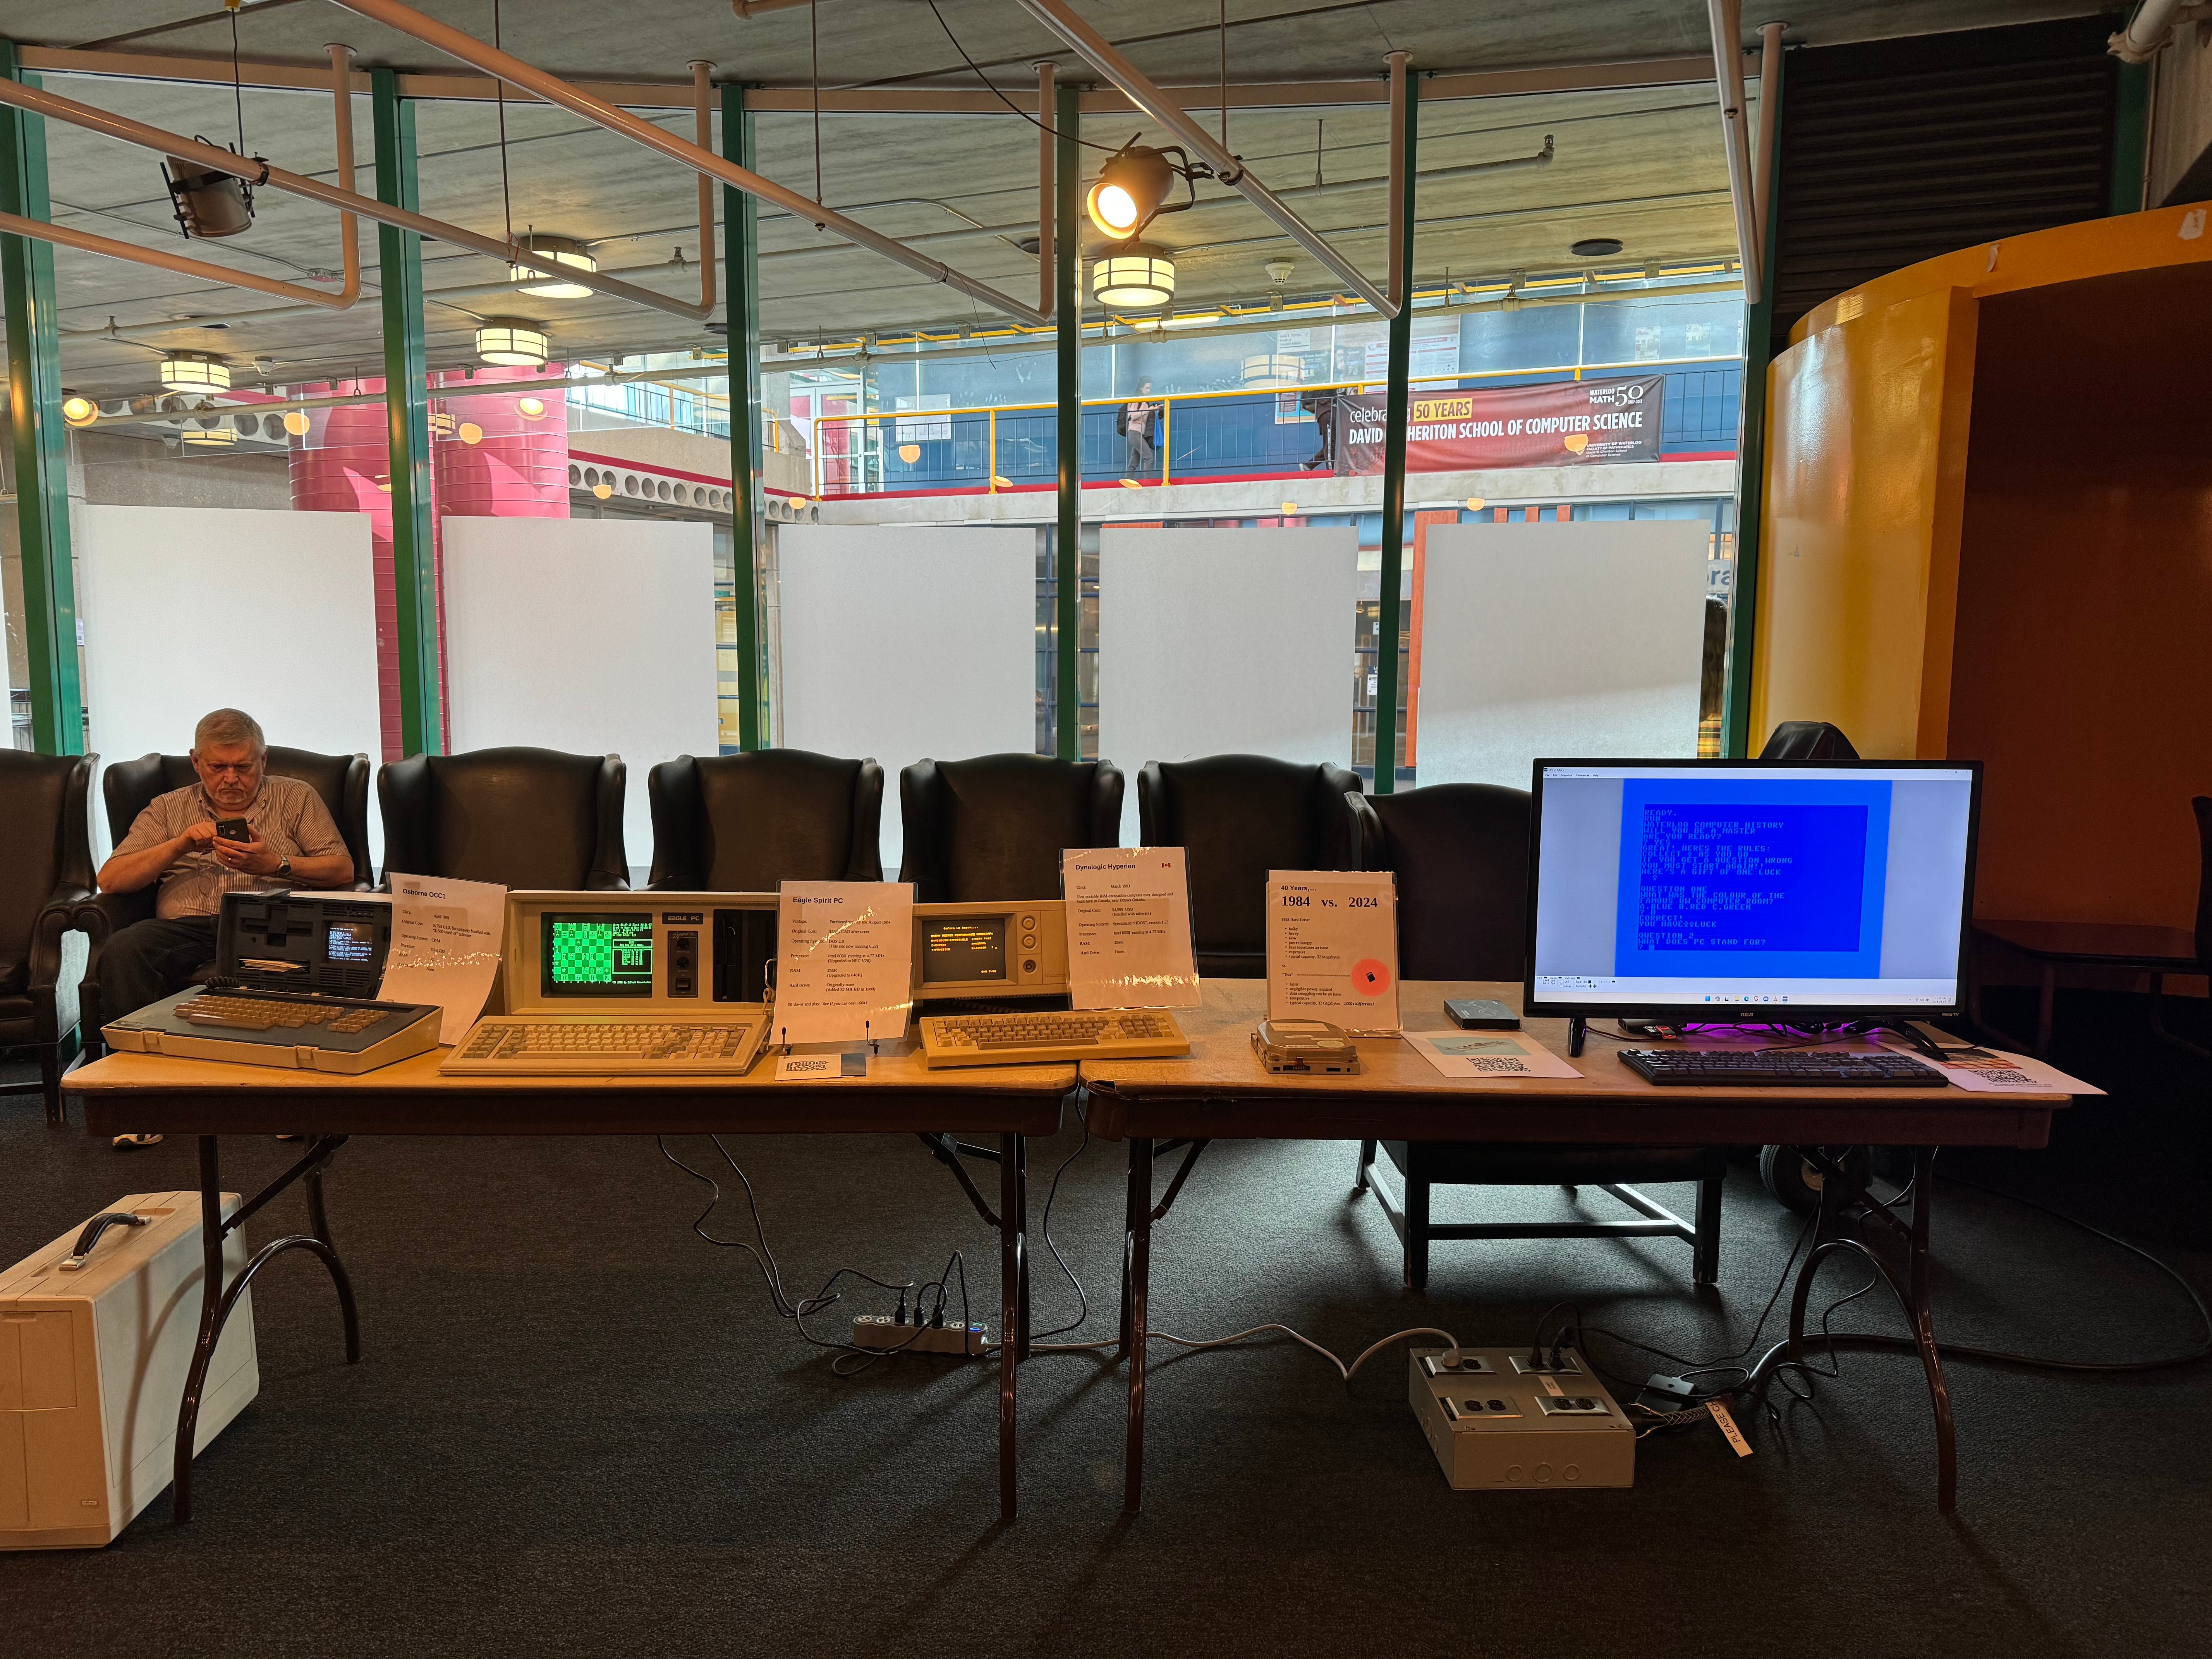 The Computer Heritage Group display